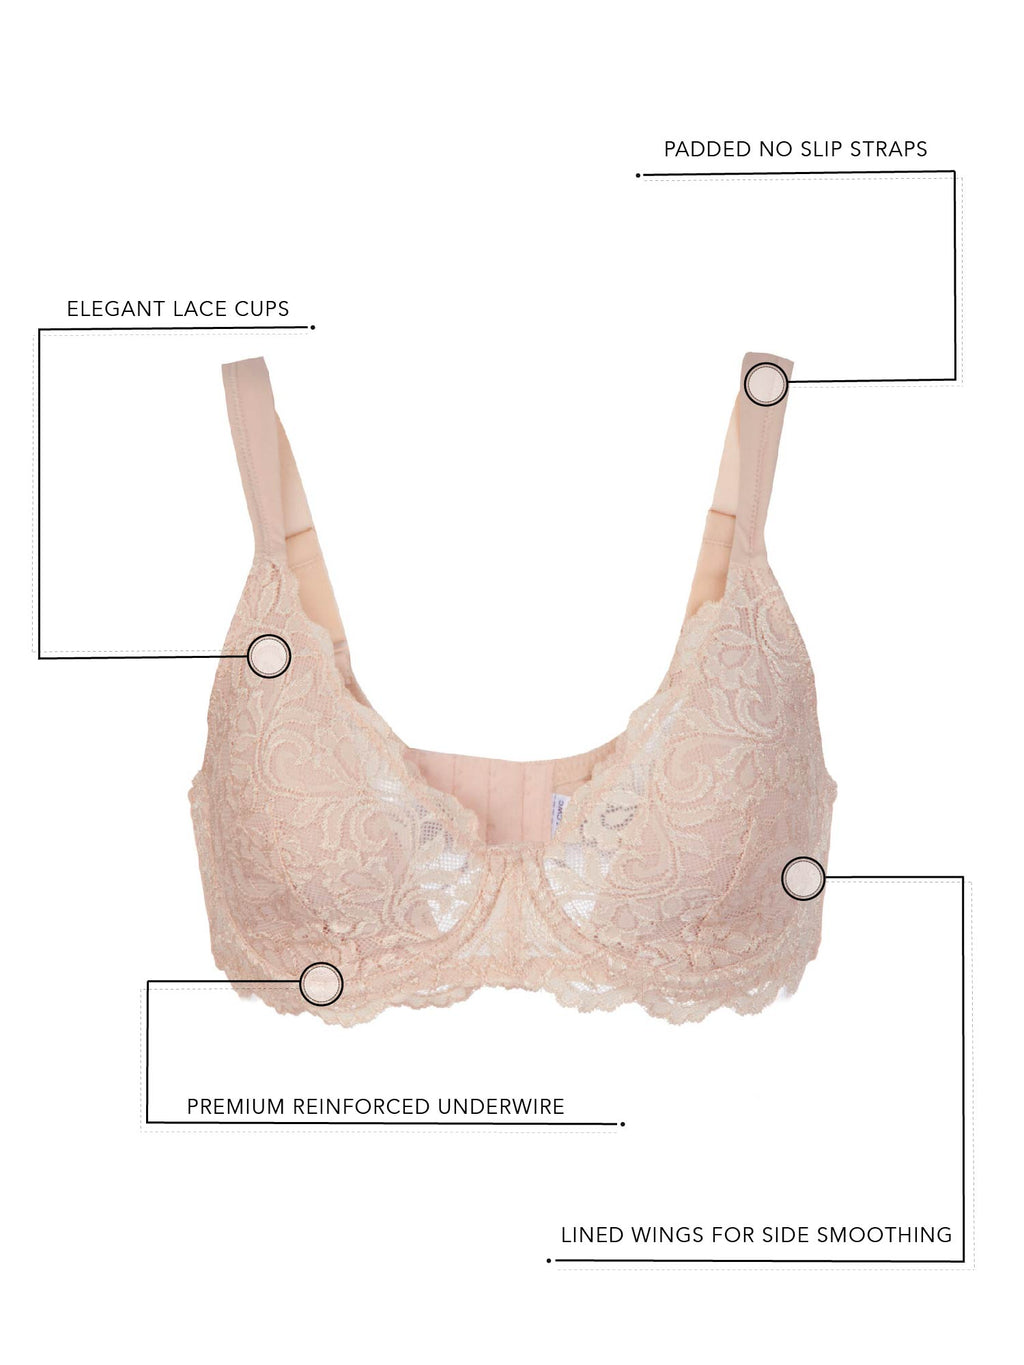 Redefining Myself with Leading Lady Bras - 87PAGES